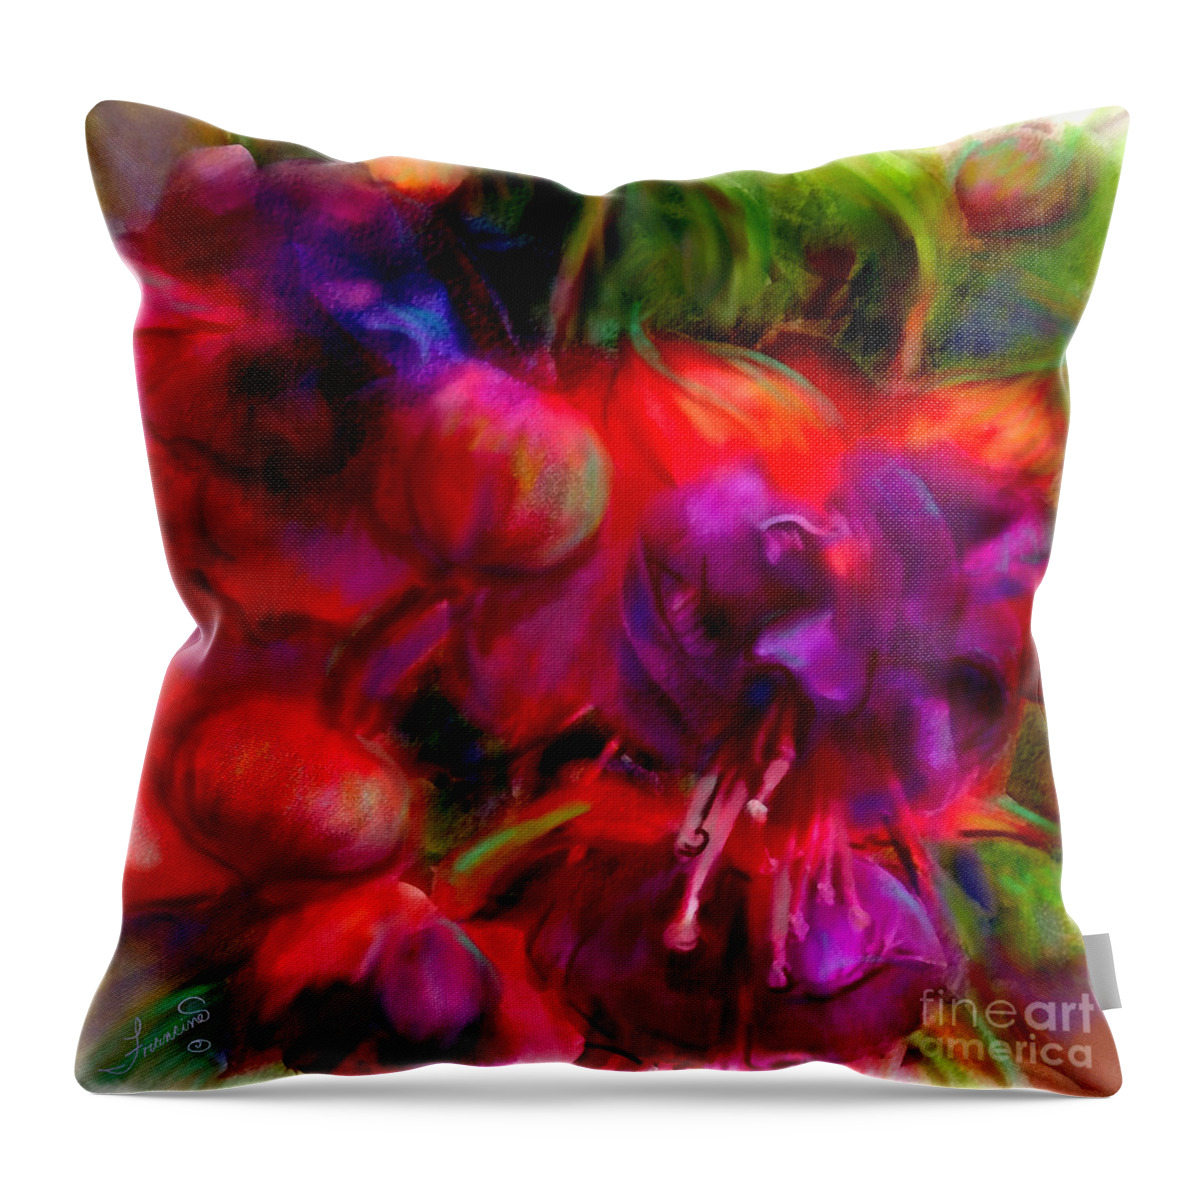 Fuschia Throw Pillow featuring the painting Fuschia Excitement by Francine Dufour Jones